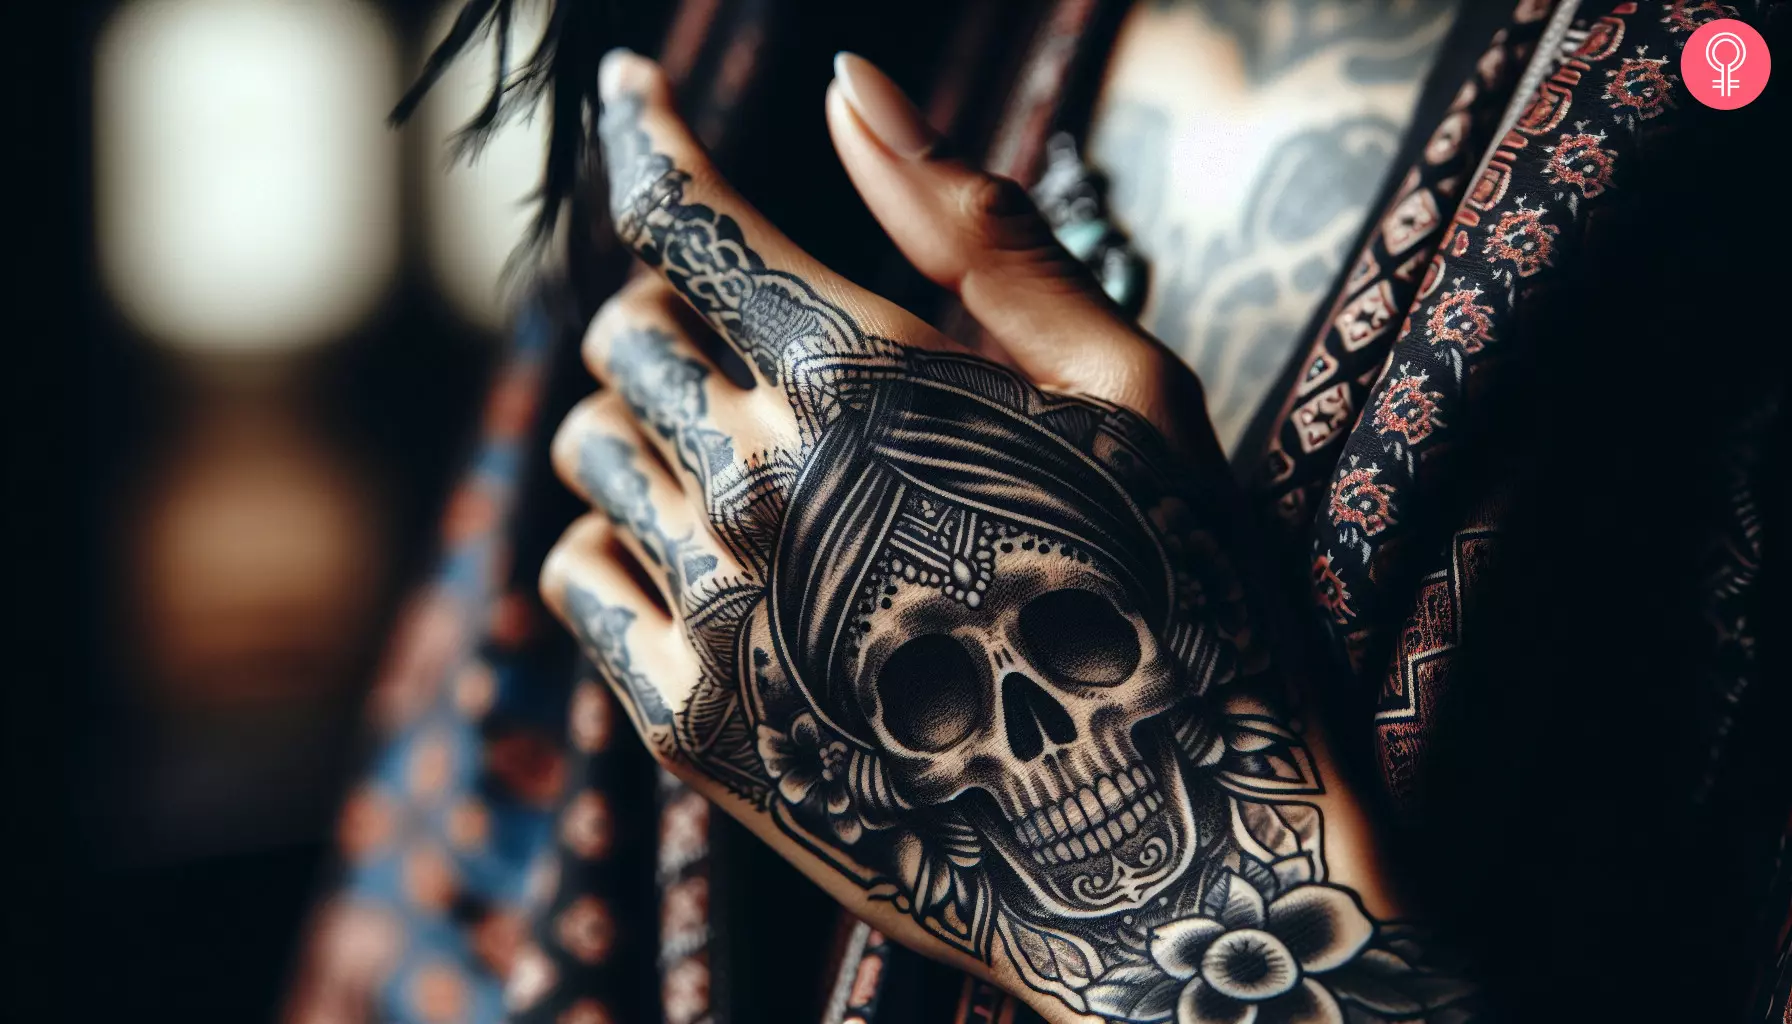 Woman with a skull tattoo on the hand